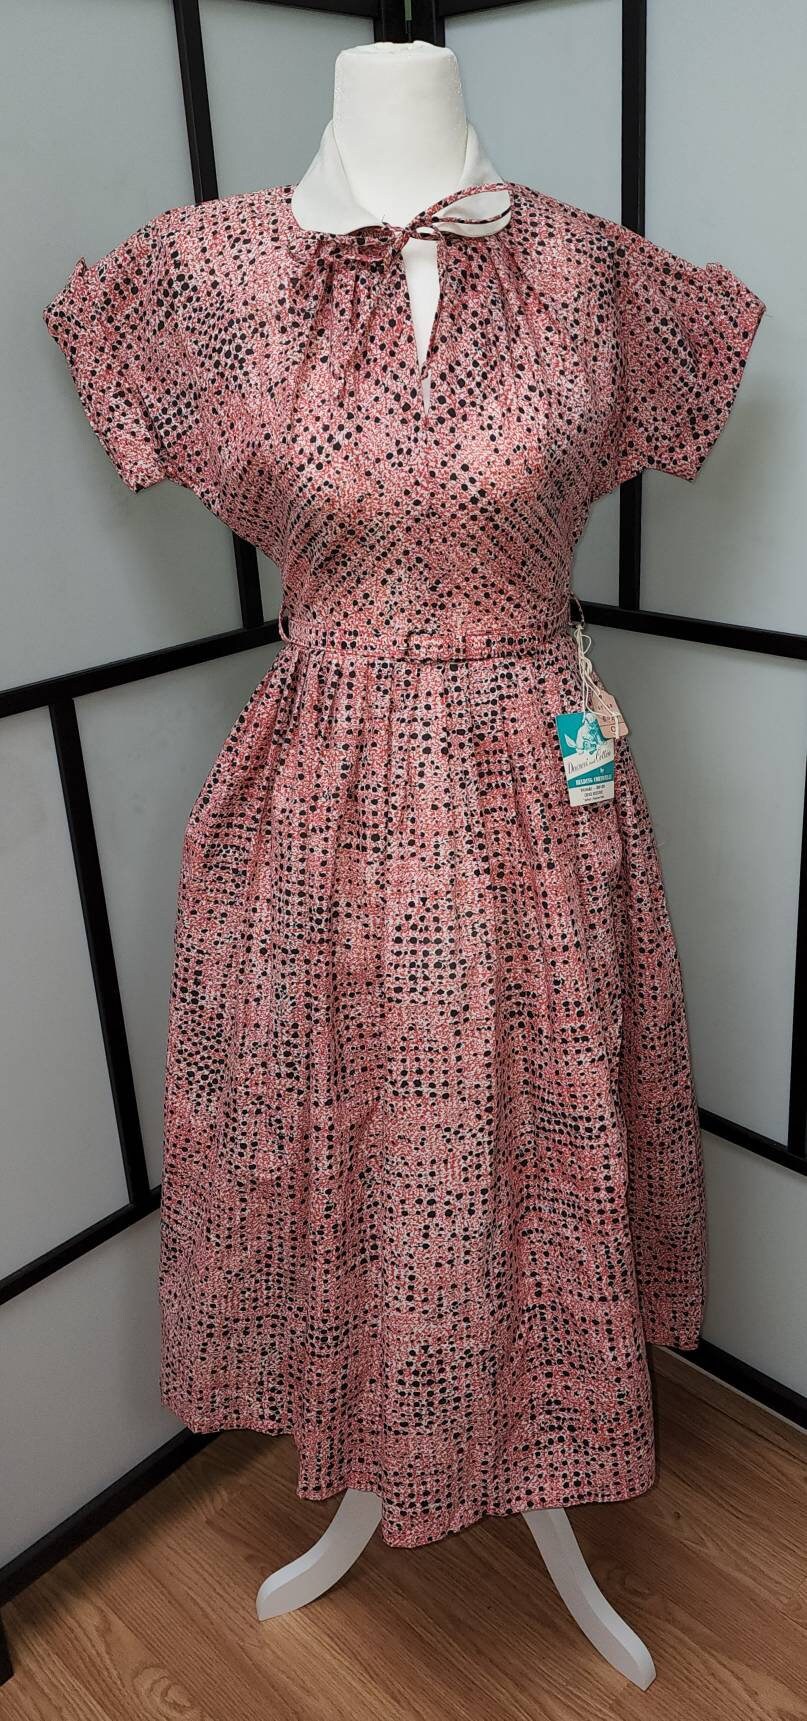 DEADSTOCK Vintage 1950s Dress Red Black Abstract Dot Pattern Day Dress White Collar Keyhole Neck Unworn NWT Mid Century Rockabilly S